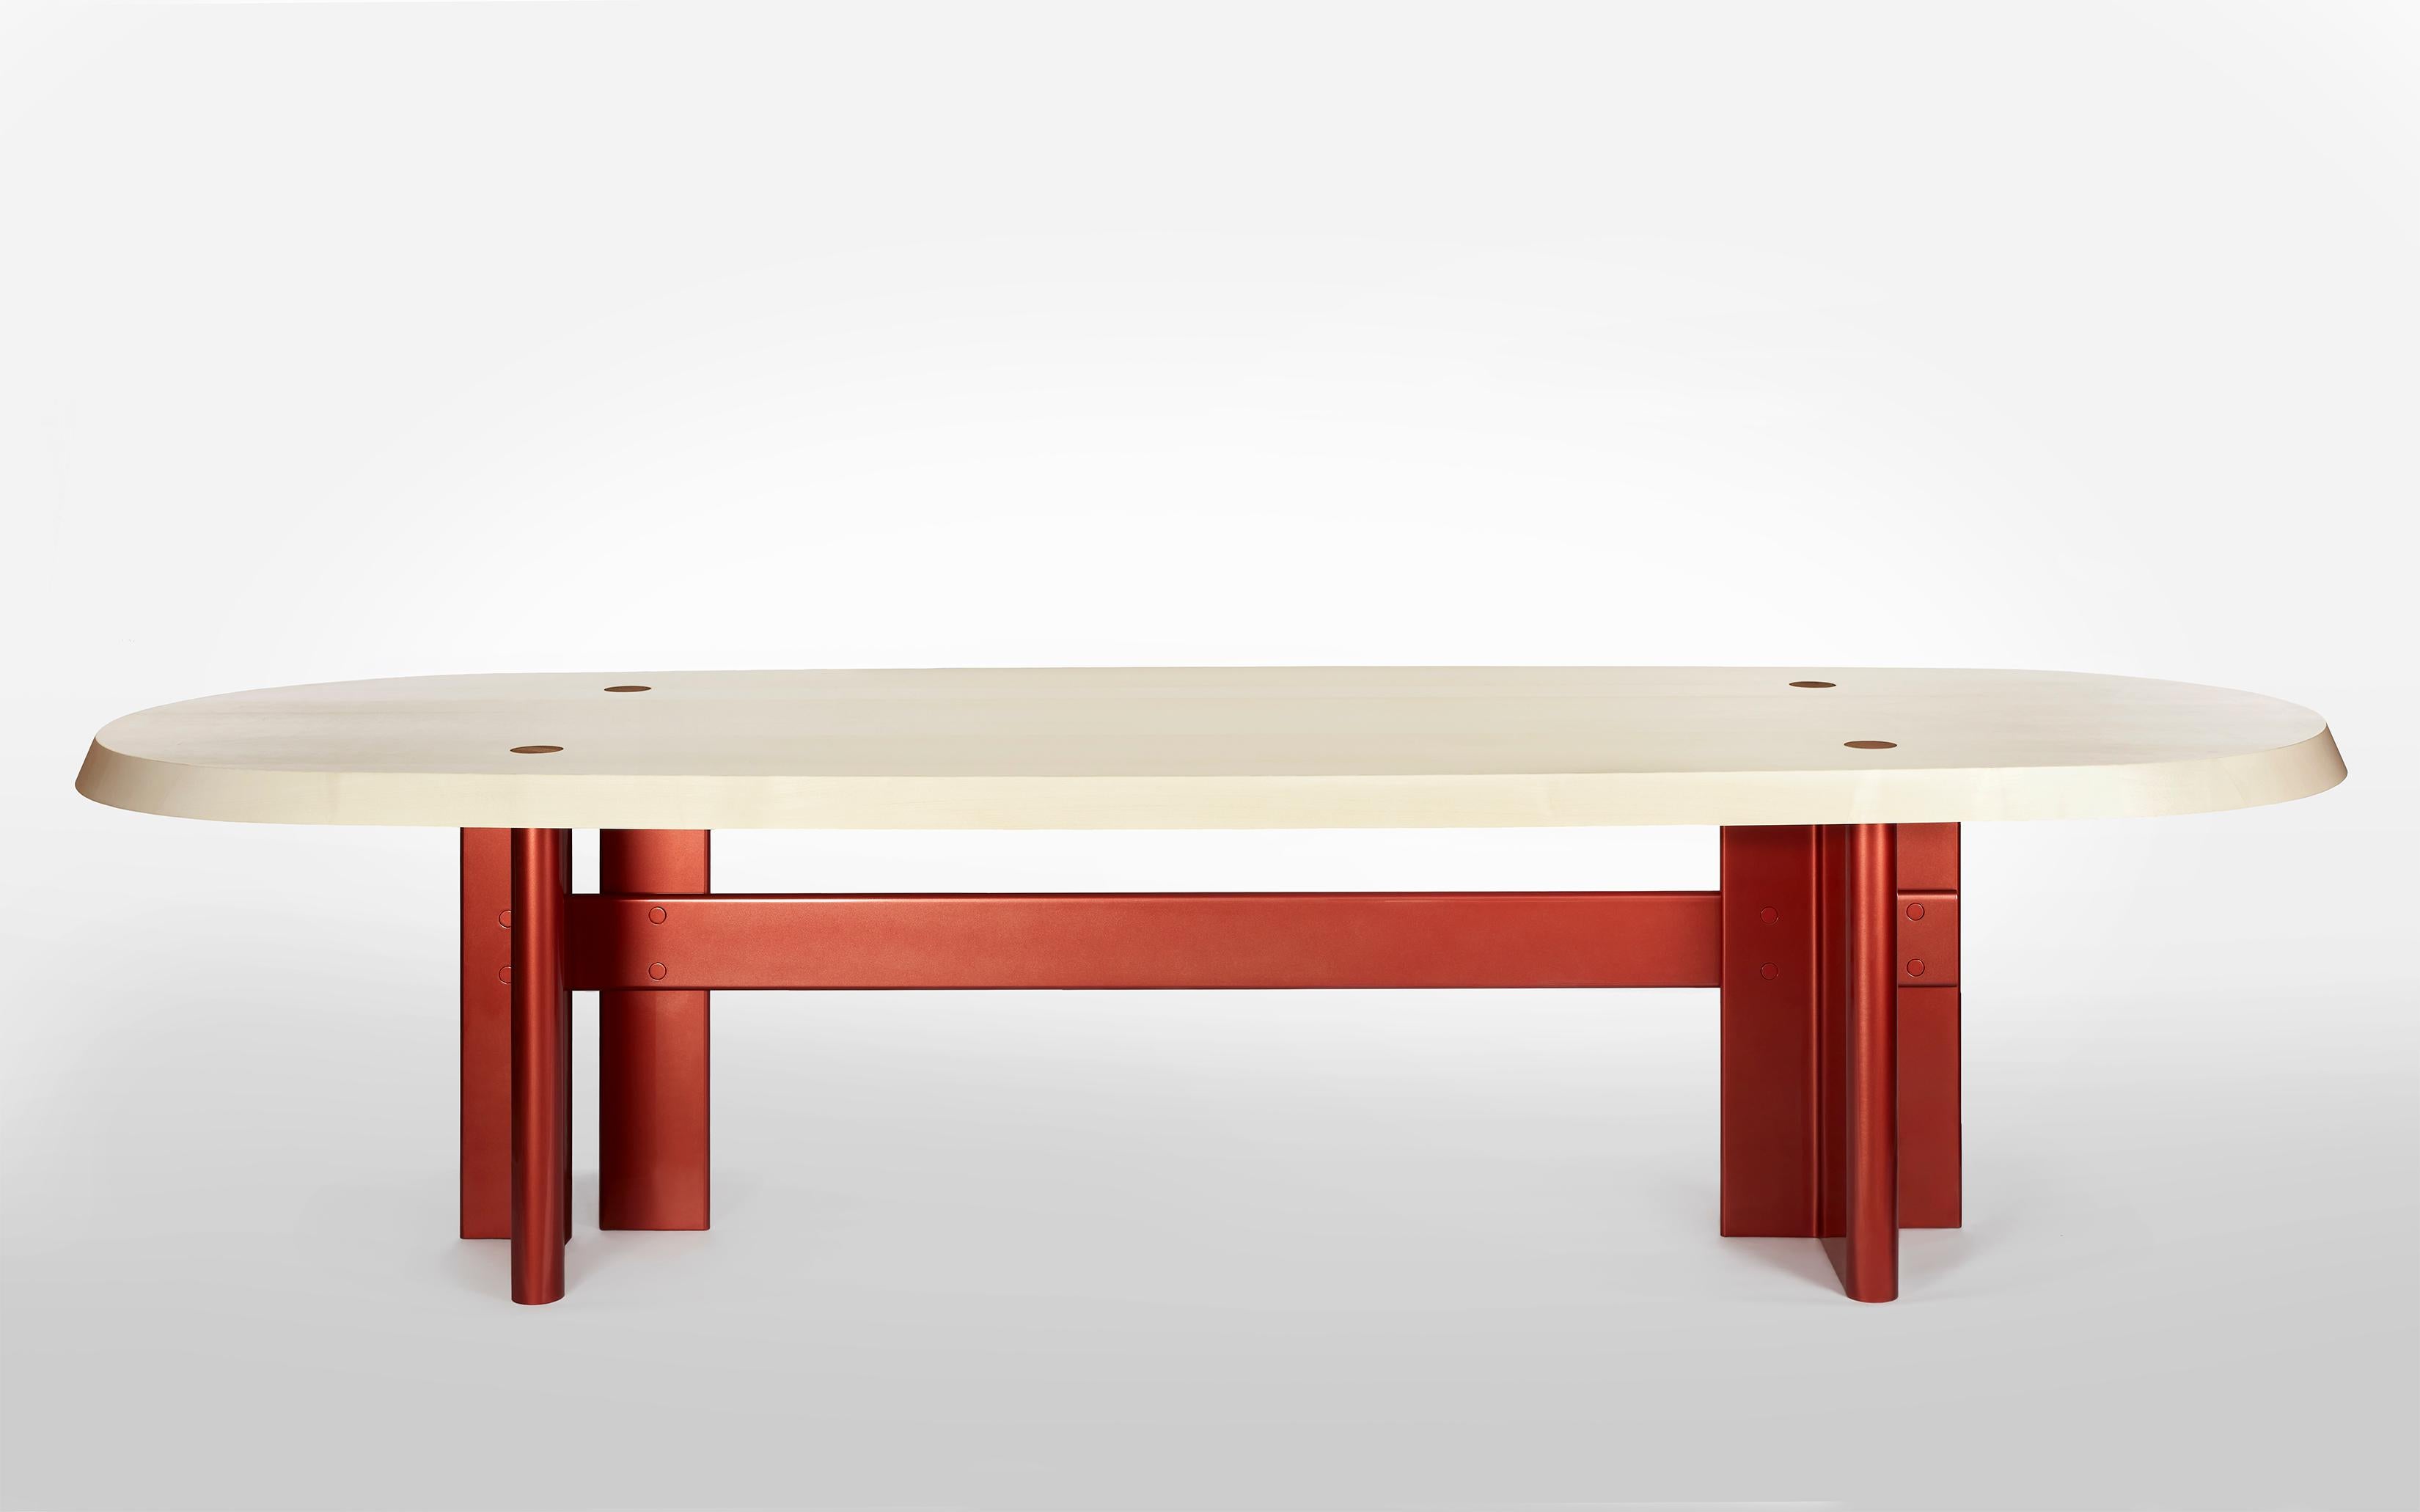 Kayak maple dining table by Gisbert Pöppler
Dimensions: D 320 x W 110 x H 75 cm
Materials: Maple wood, high gloss lacquered steel base

Perfectly balanced and sturdy like the sleek boat and hunter of the arctic, the Kayak dinner table is a playful